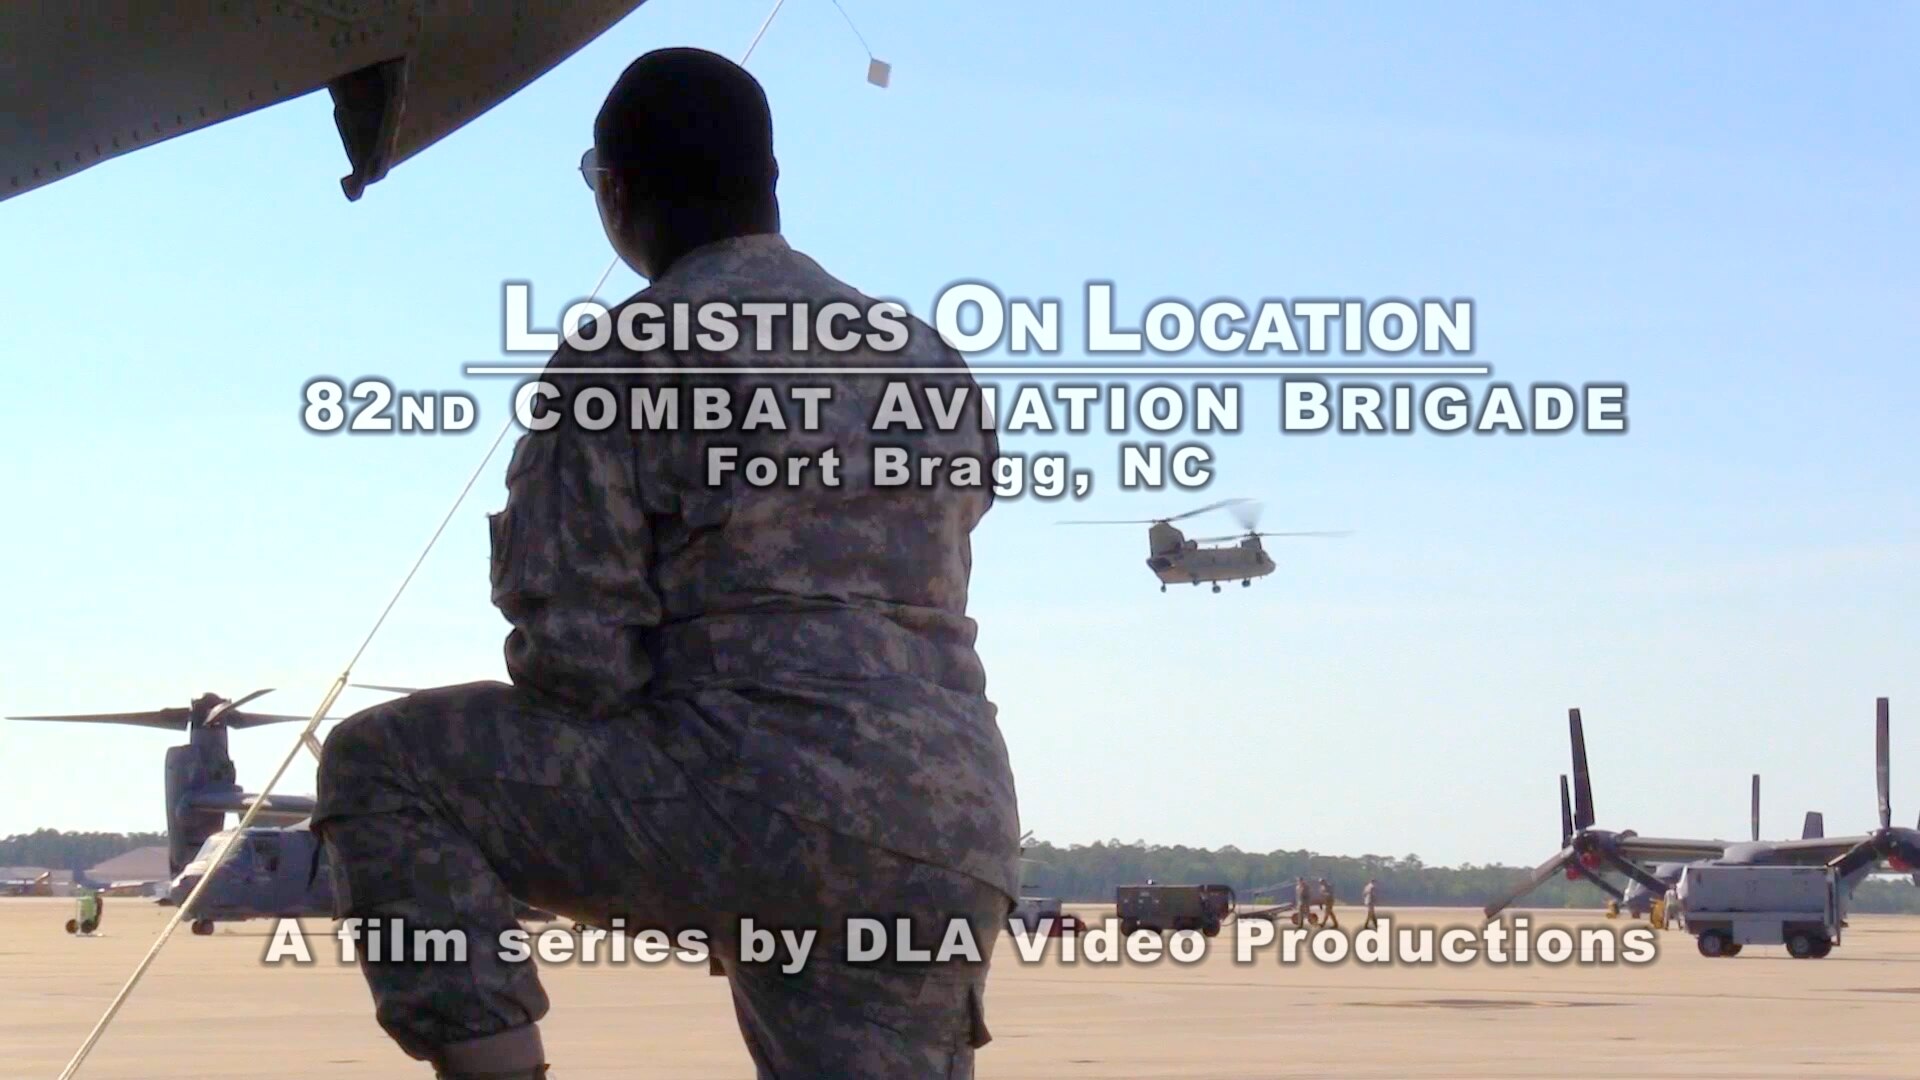 The three-minute video offers a glimpse of just one way DLA supports the warfighter every day.